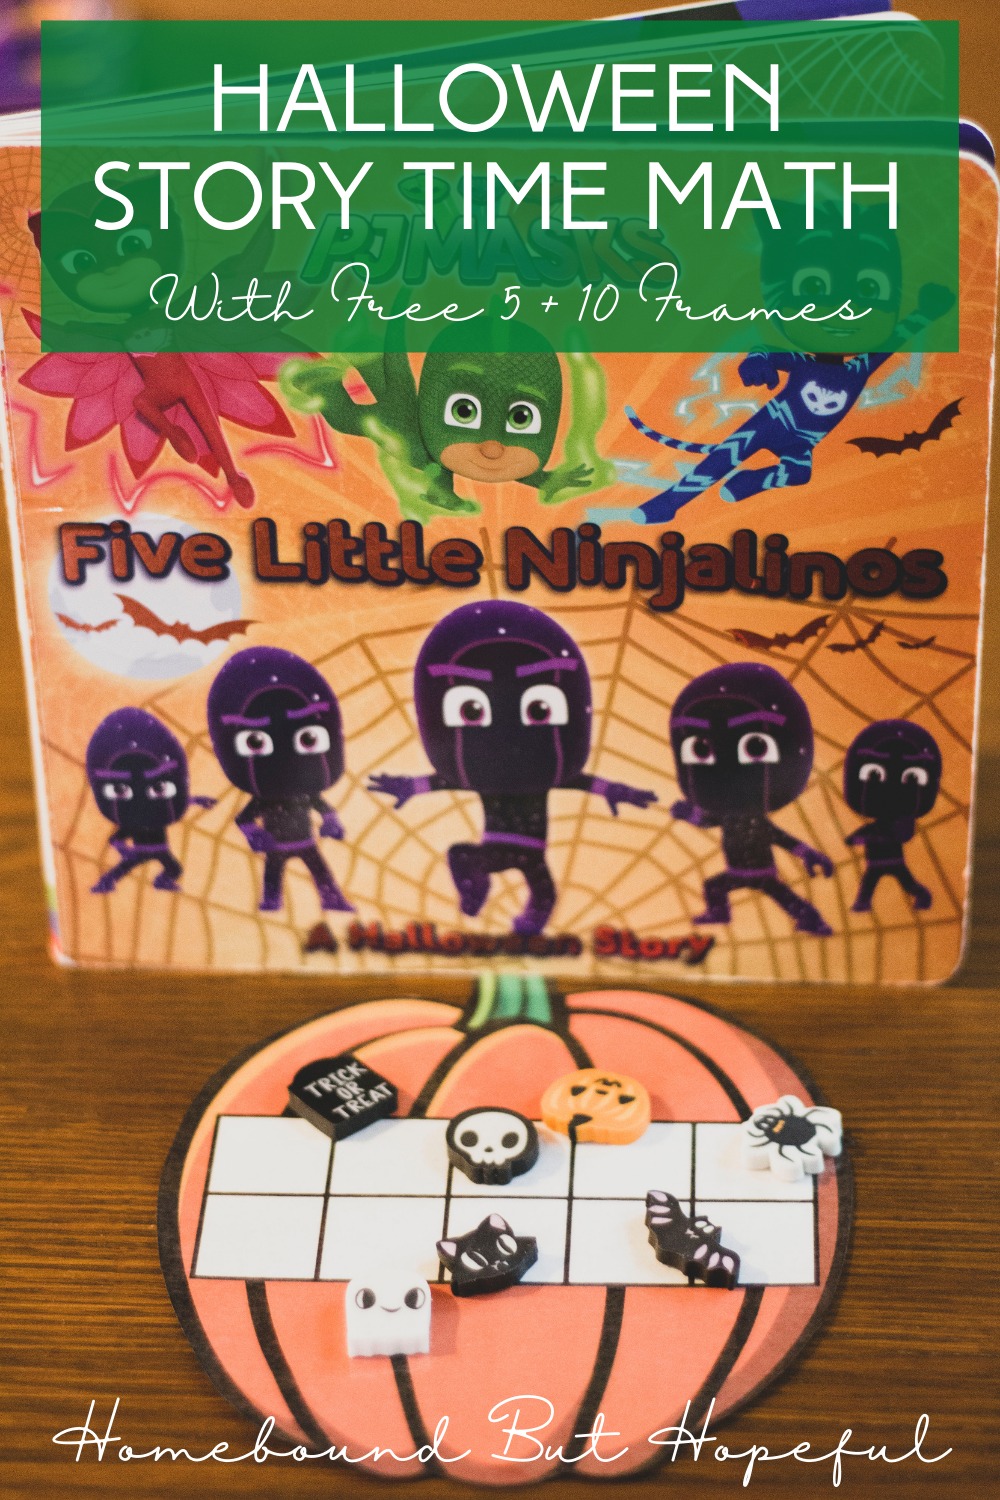 Math practice is extra fun, and extra spooky when you pair it with a Halloween book! Grab your free 5 + 10 frames, then have a Halloween math story time of your own!